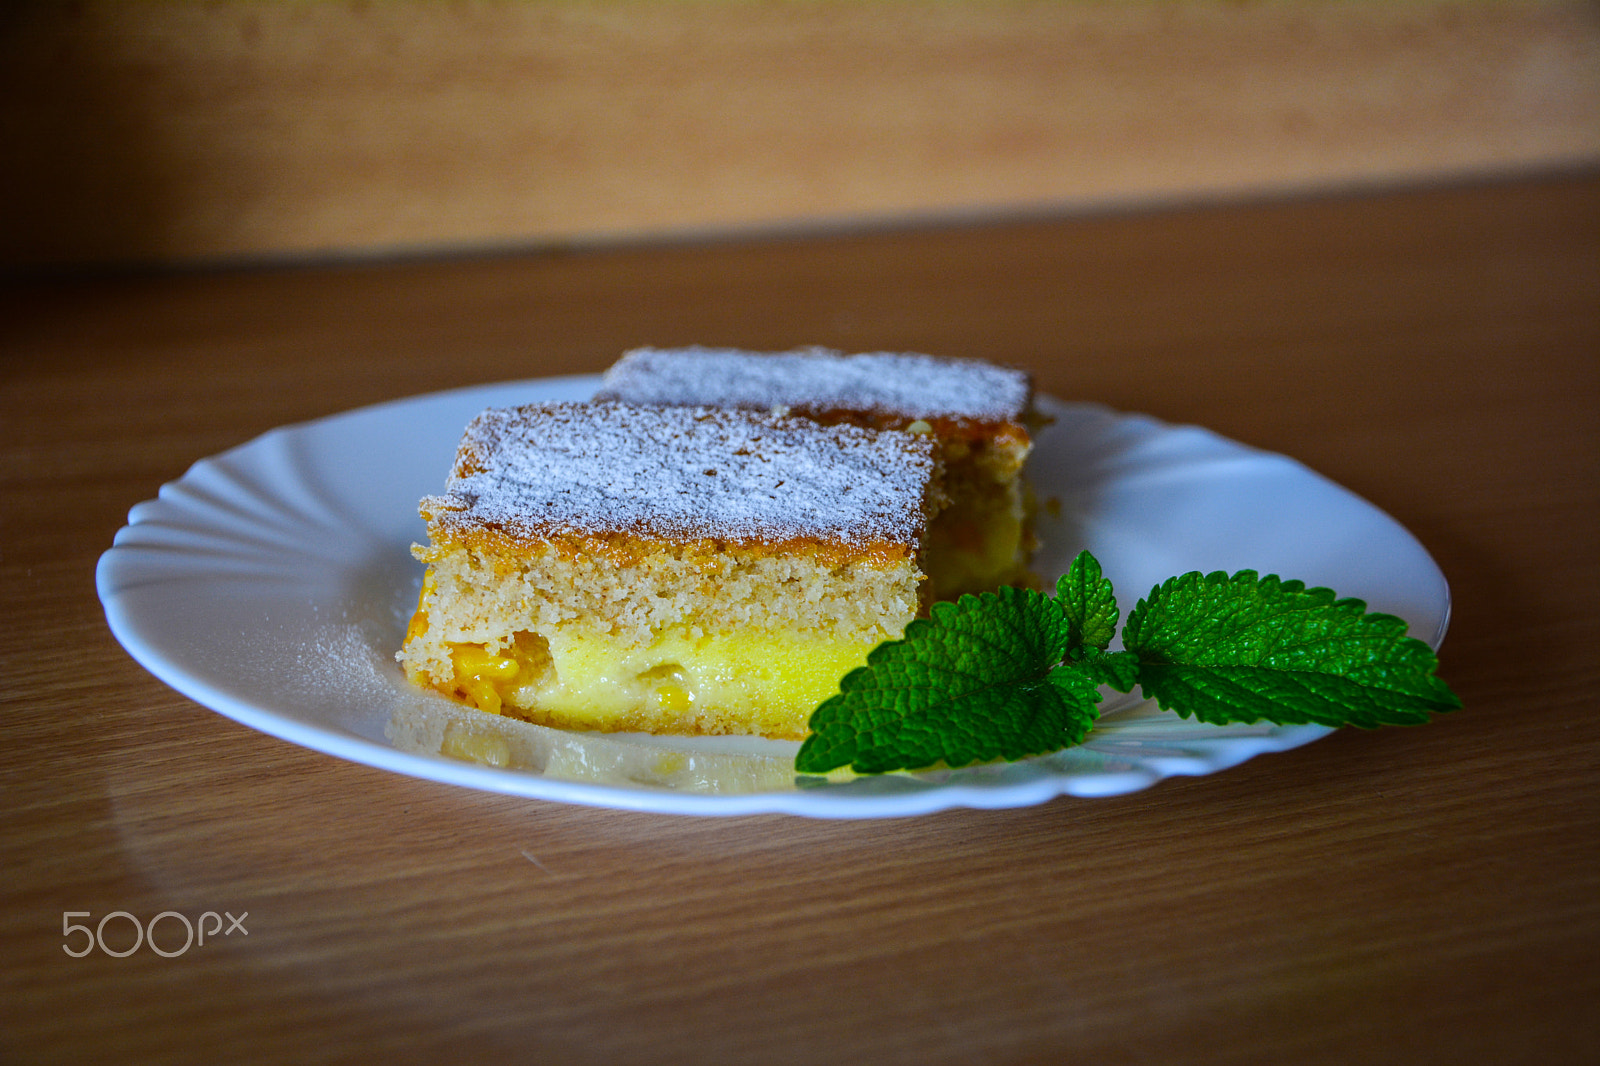 Nikon D5200 + Tamron 18-270mm F3.5-6.3 Di II VC PZD sample photo. Pie with mint leaves on a plate photography